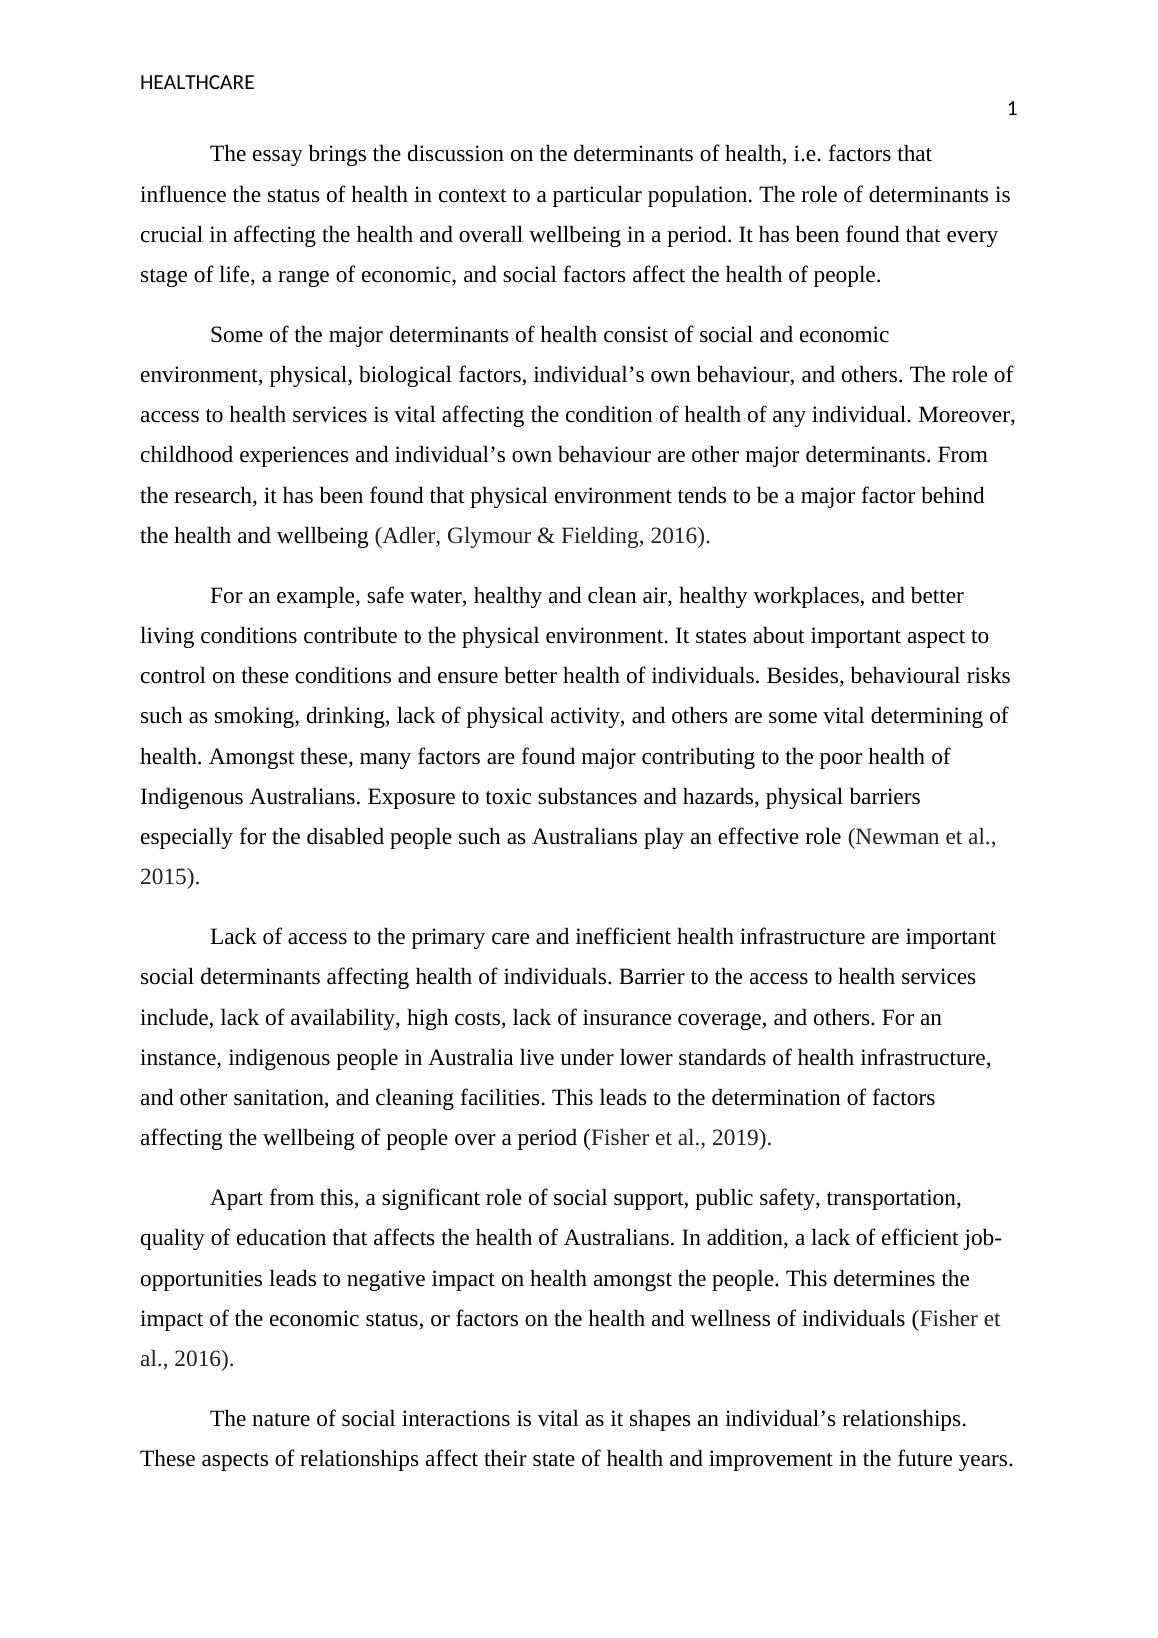 Essay about Healthcare 2022_2